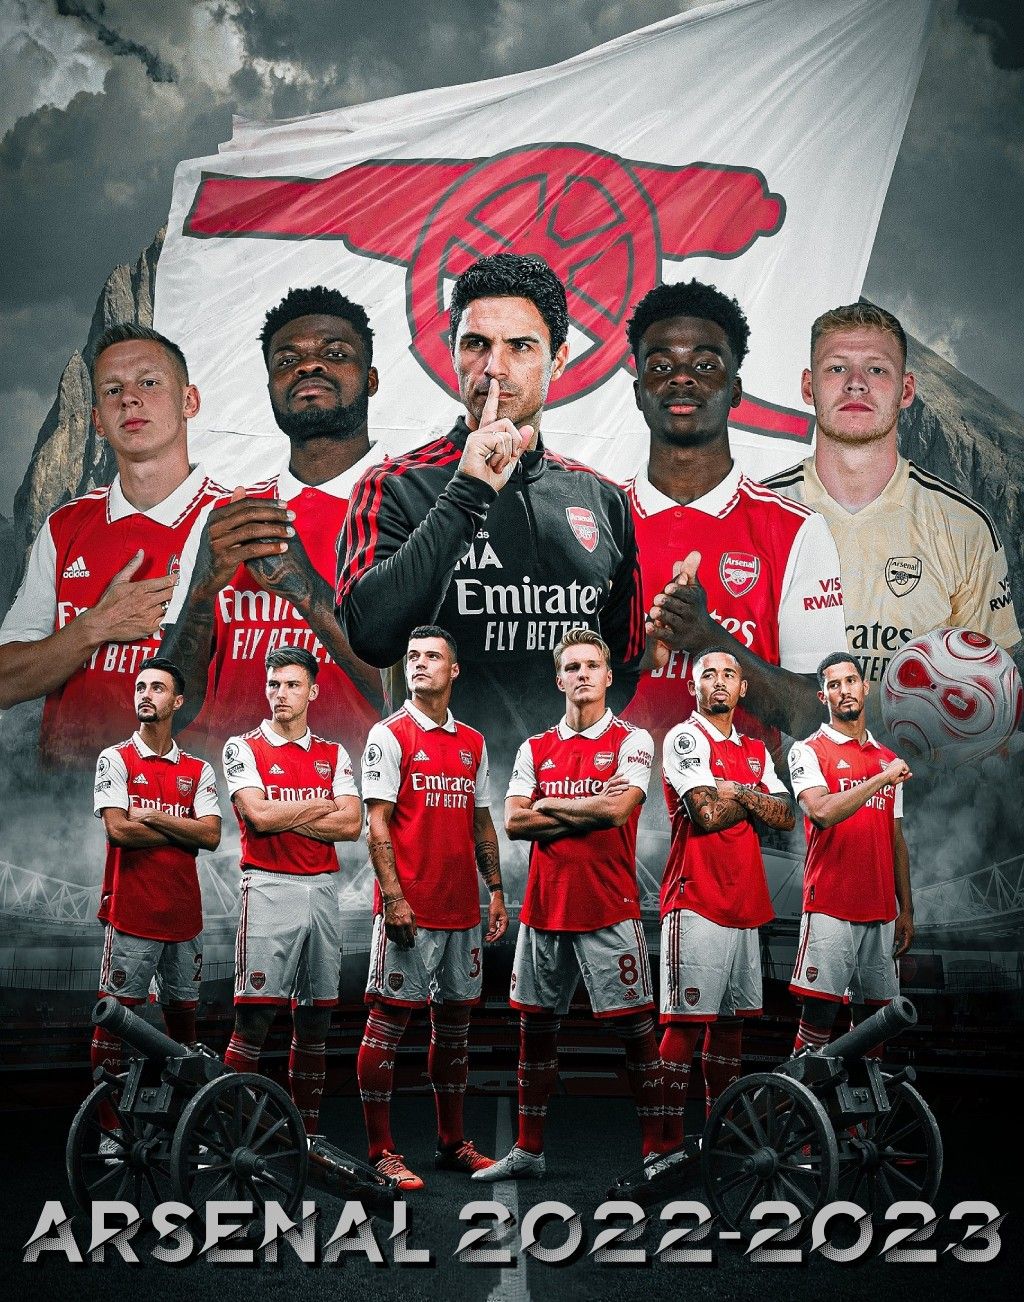 The Arsenal 2022 2023